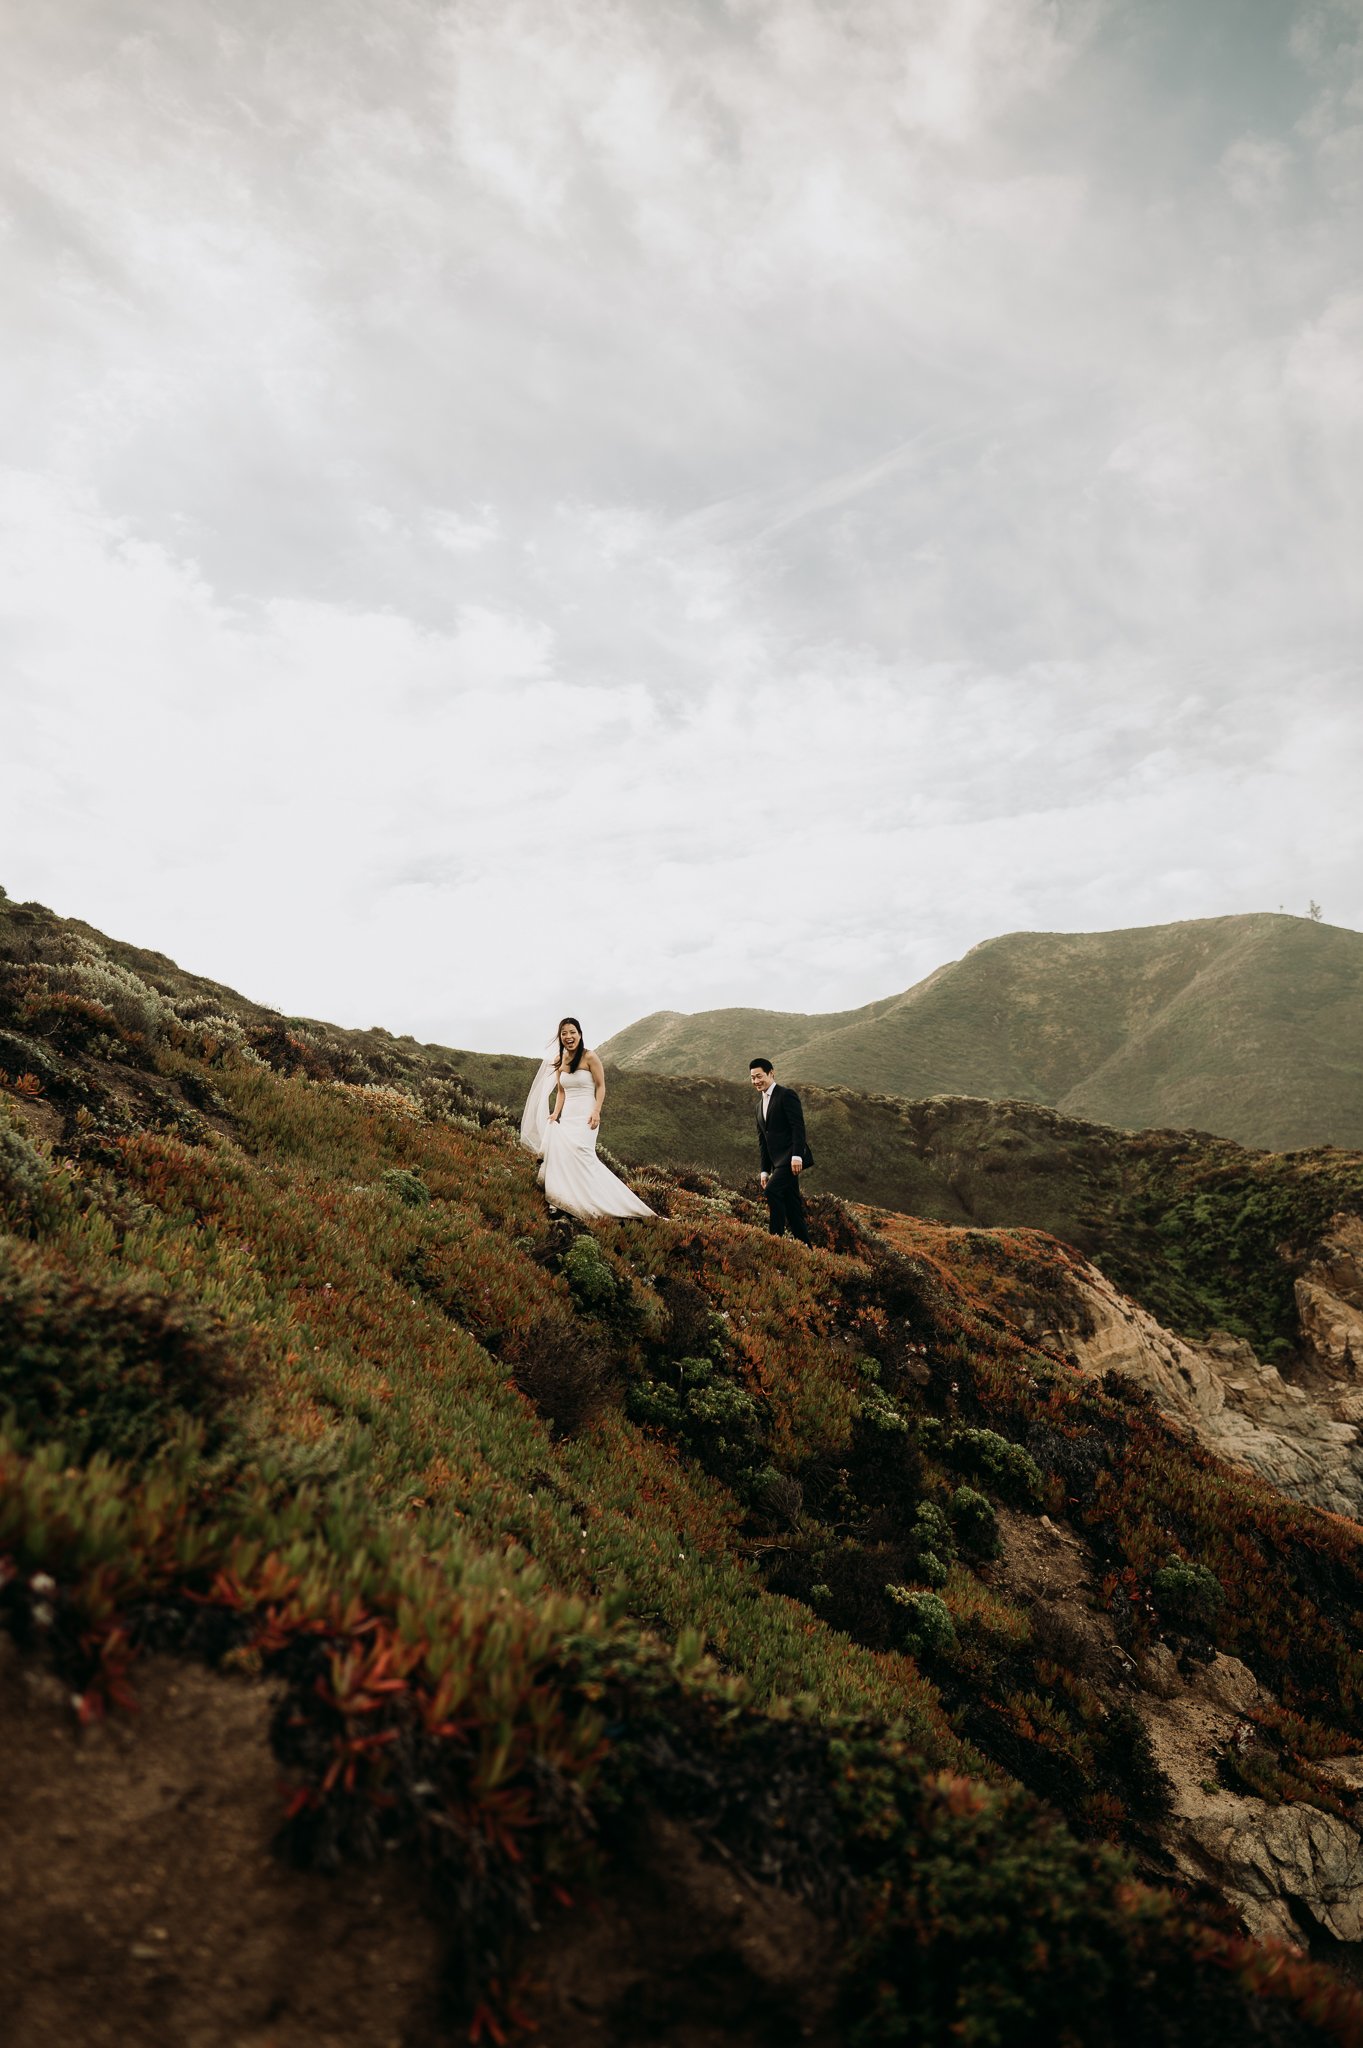 Big Sur Elopement couple walk up trail and smile at photographer with hills and moody grey skies in background